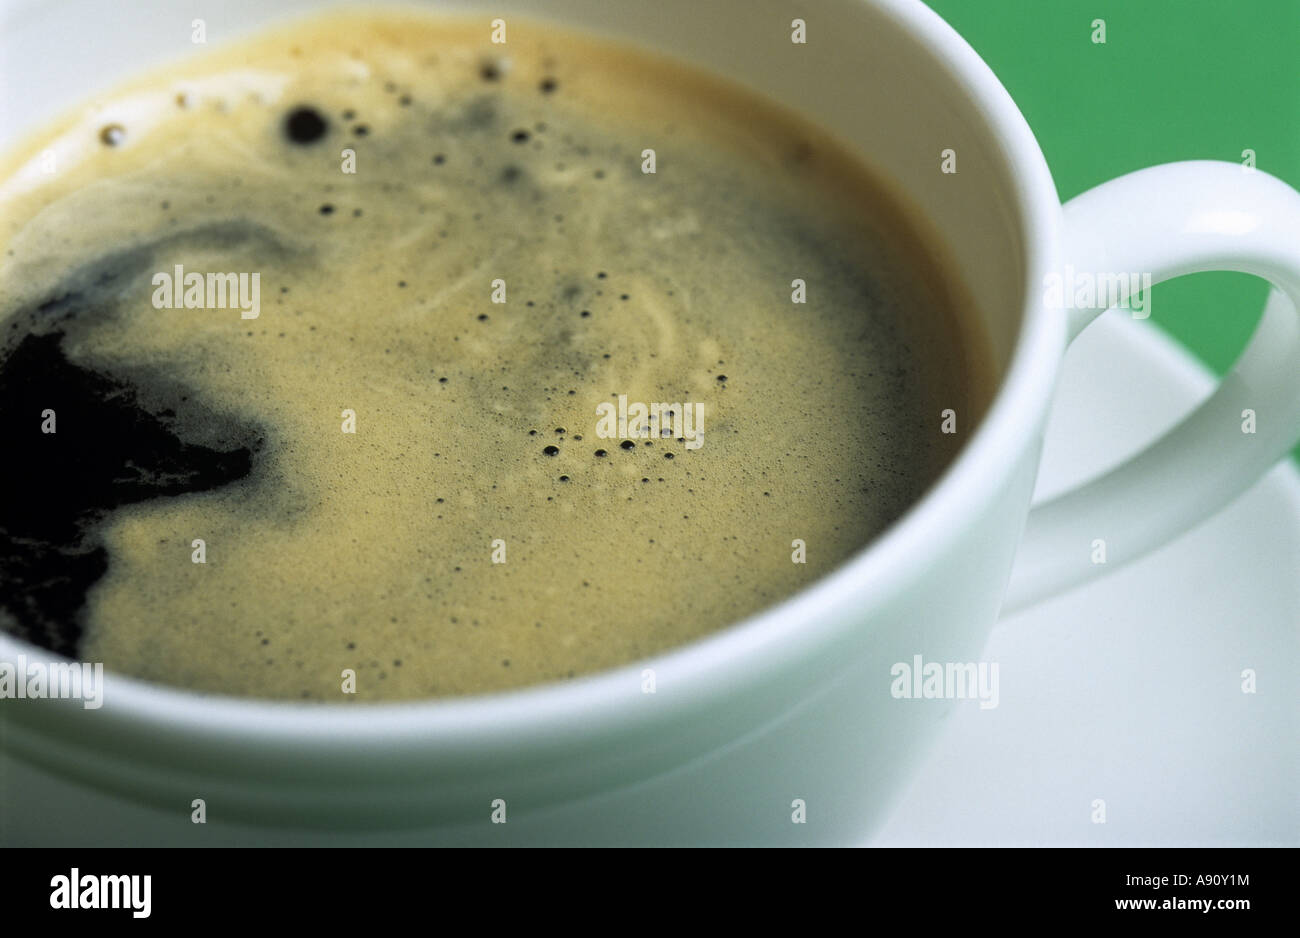 Cup of black coffee Stock Photo